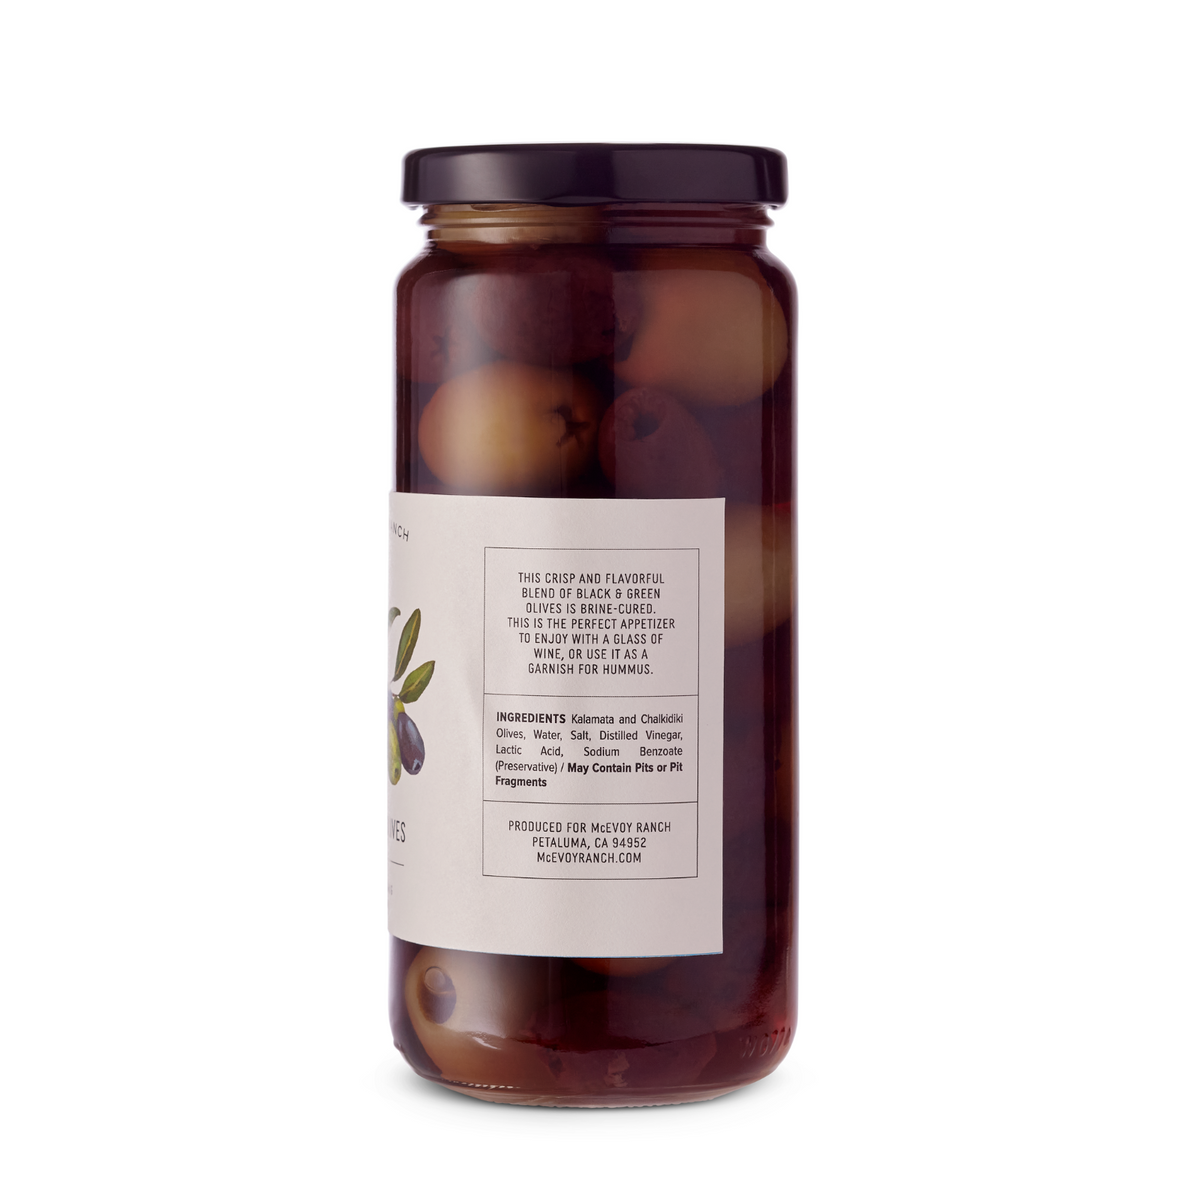 Pitted Olives 8.5 OZ